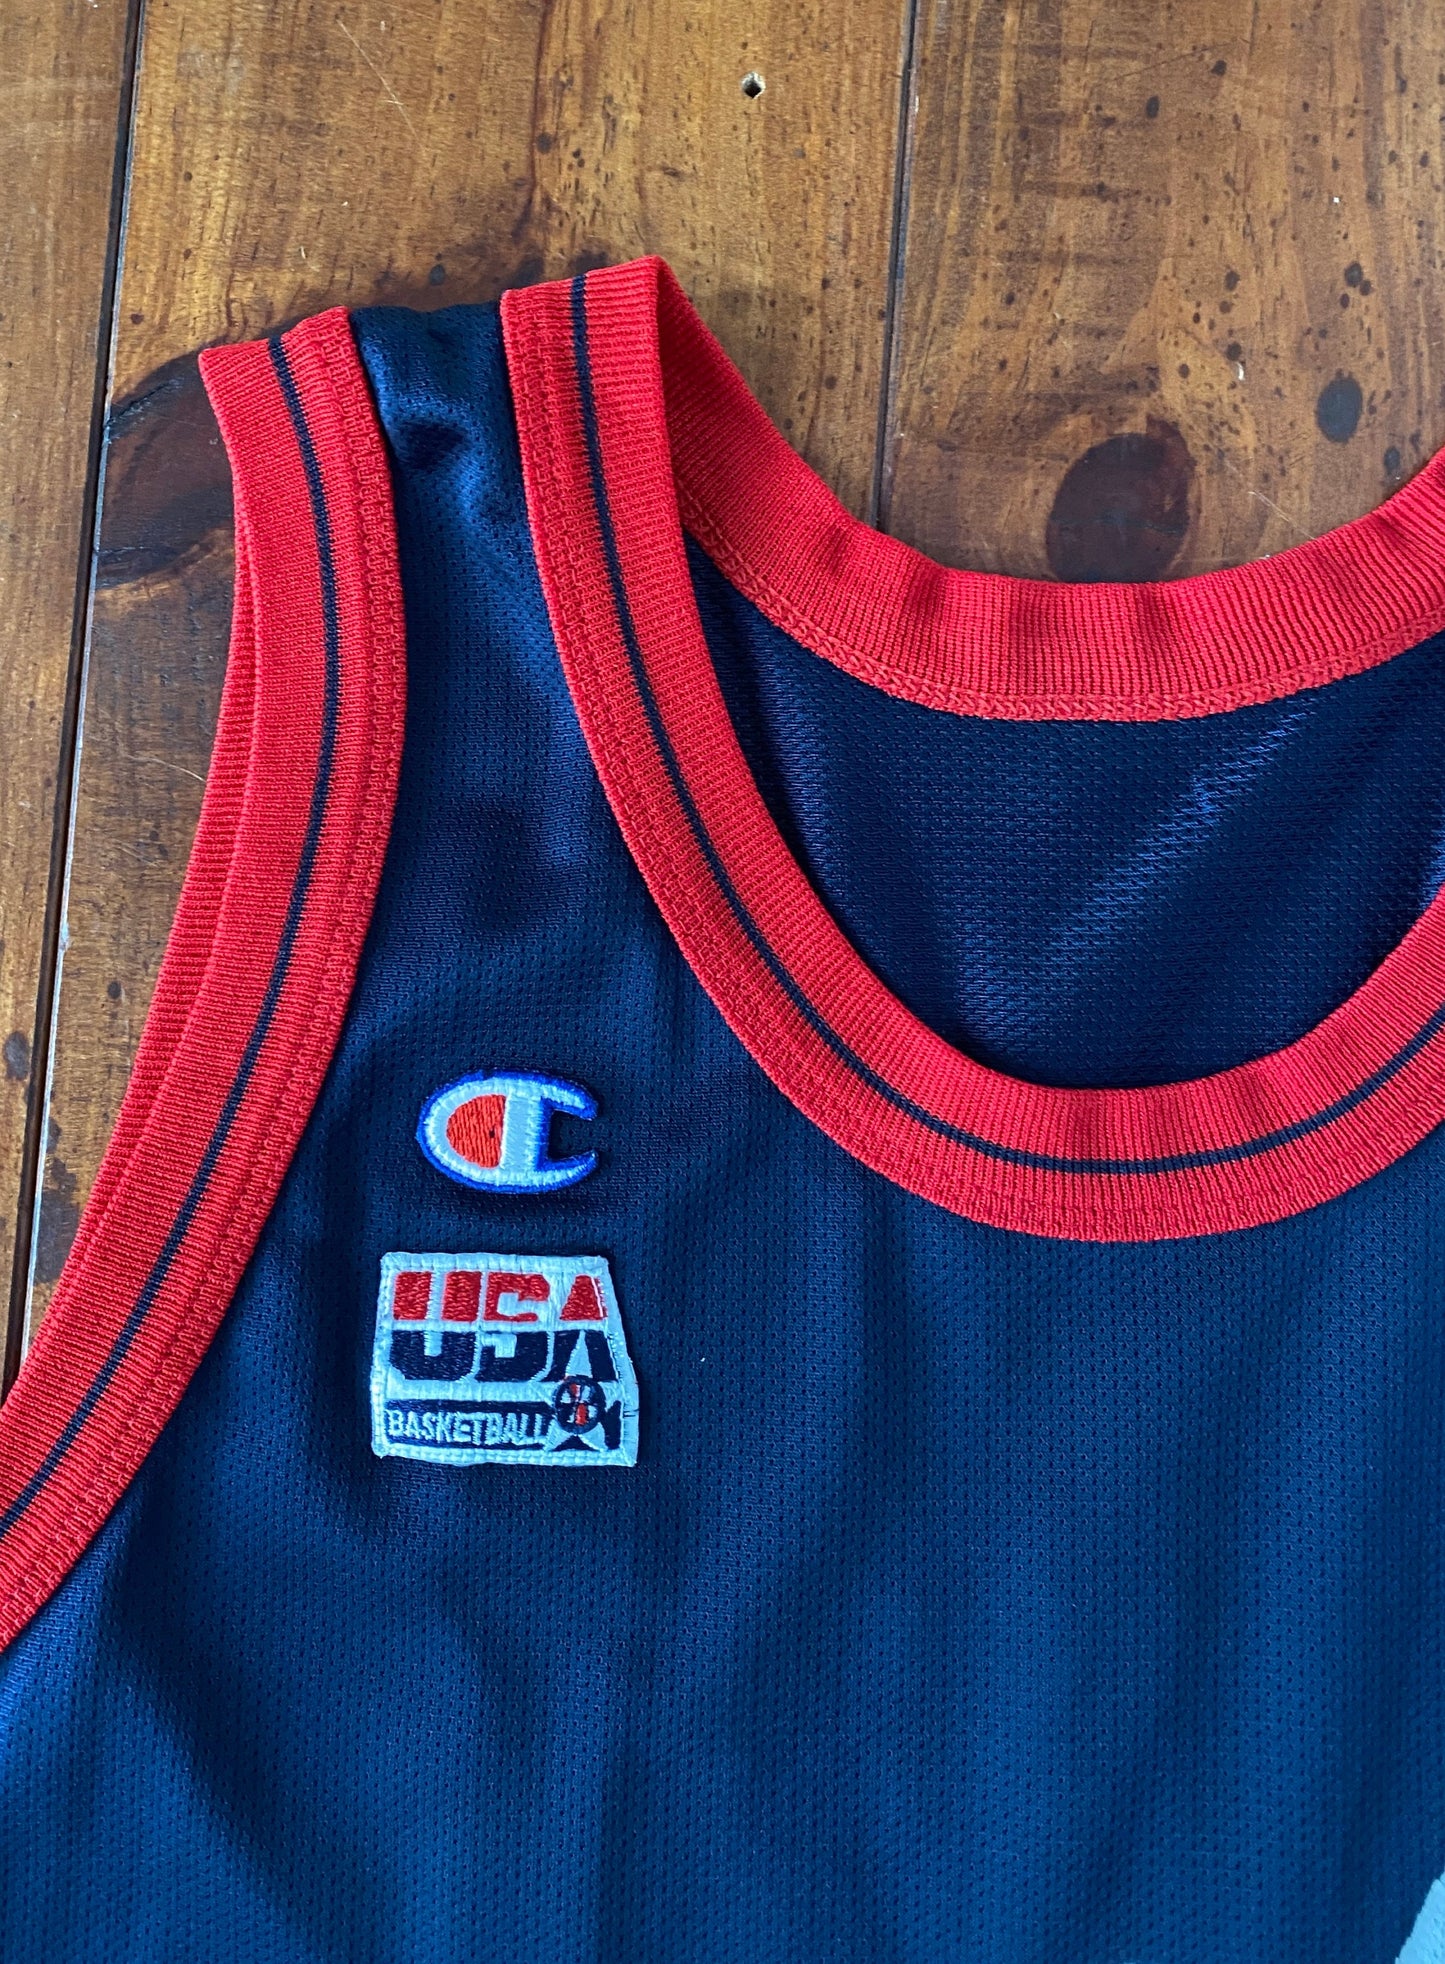 Vintage 90s NBA Champion USA Olympics Dream Team jersey, size 44, featuring Shaq O'Neal #13 - front view. Made in USA.